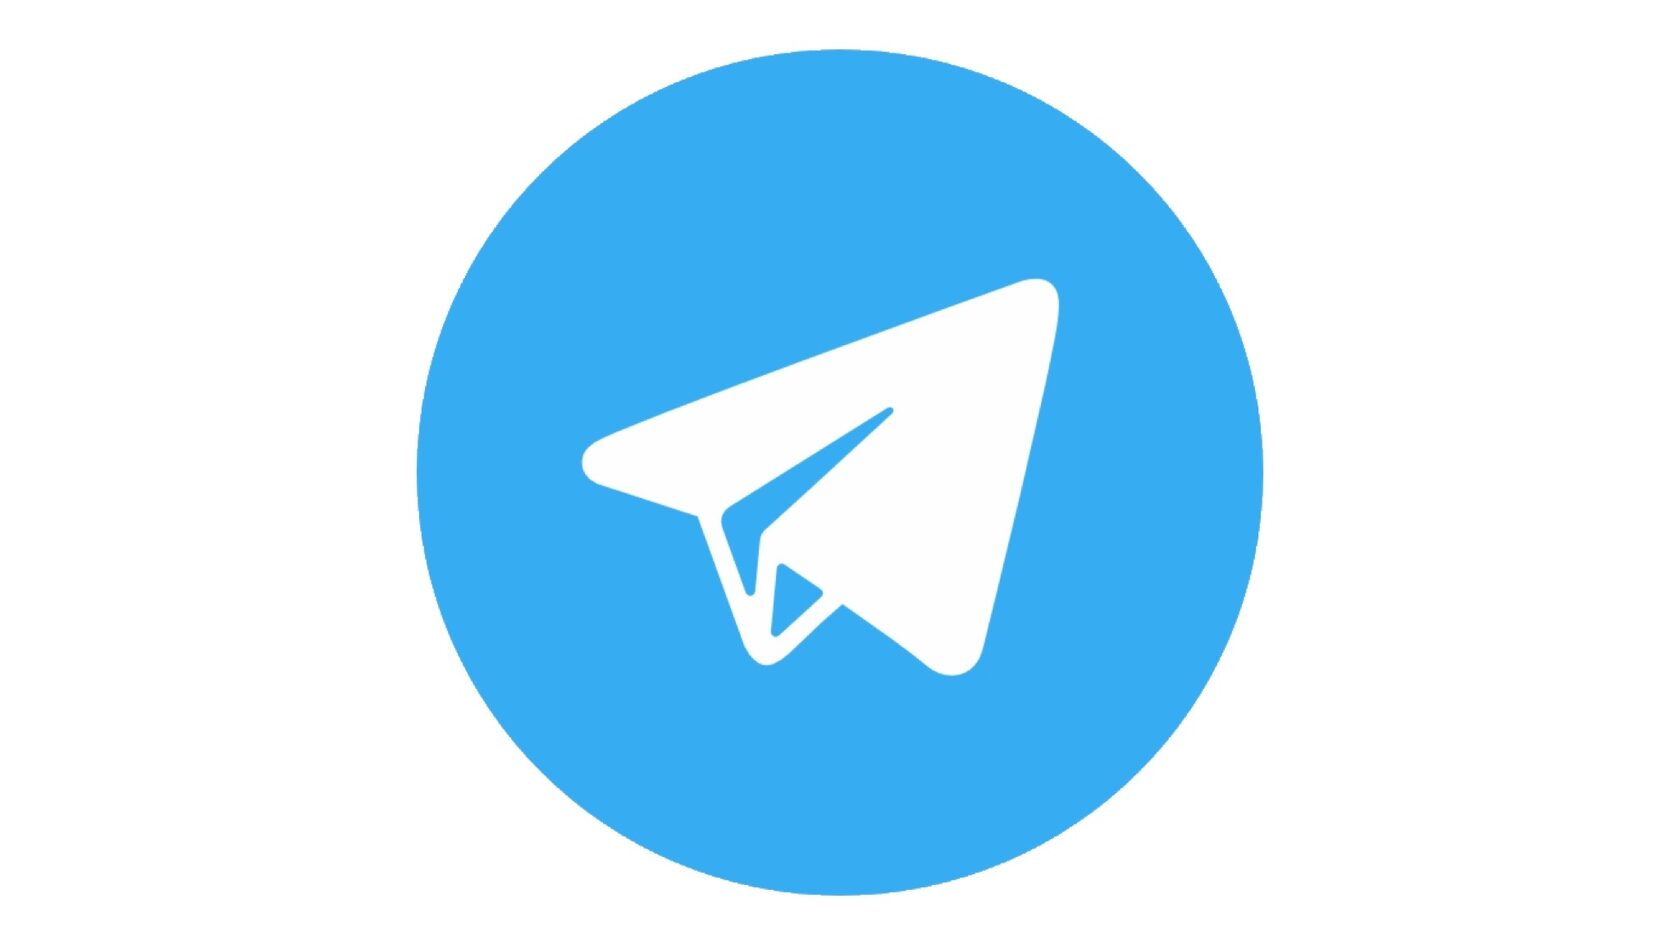 I sell a telegram channel